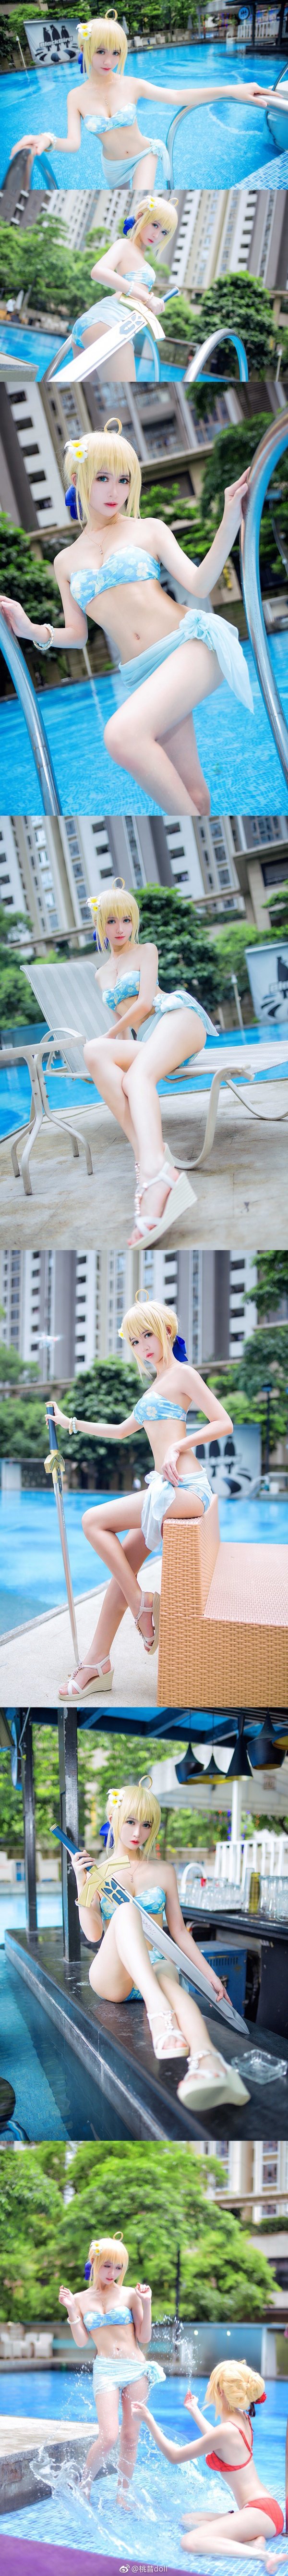 Fate/Extella Cosplay